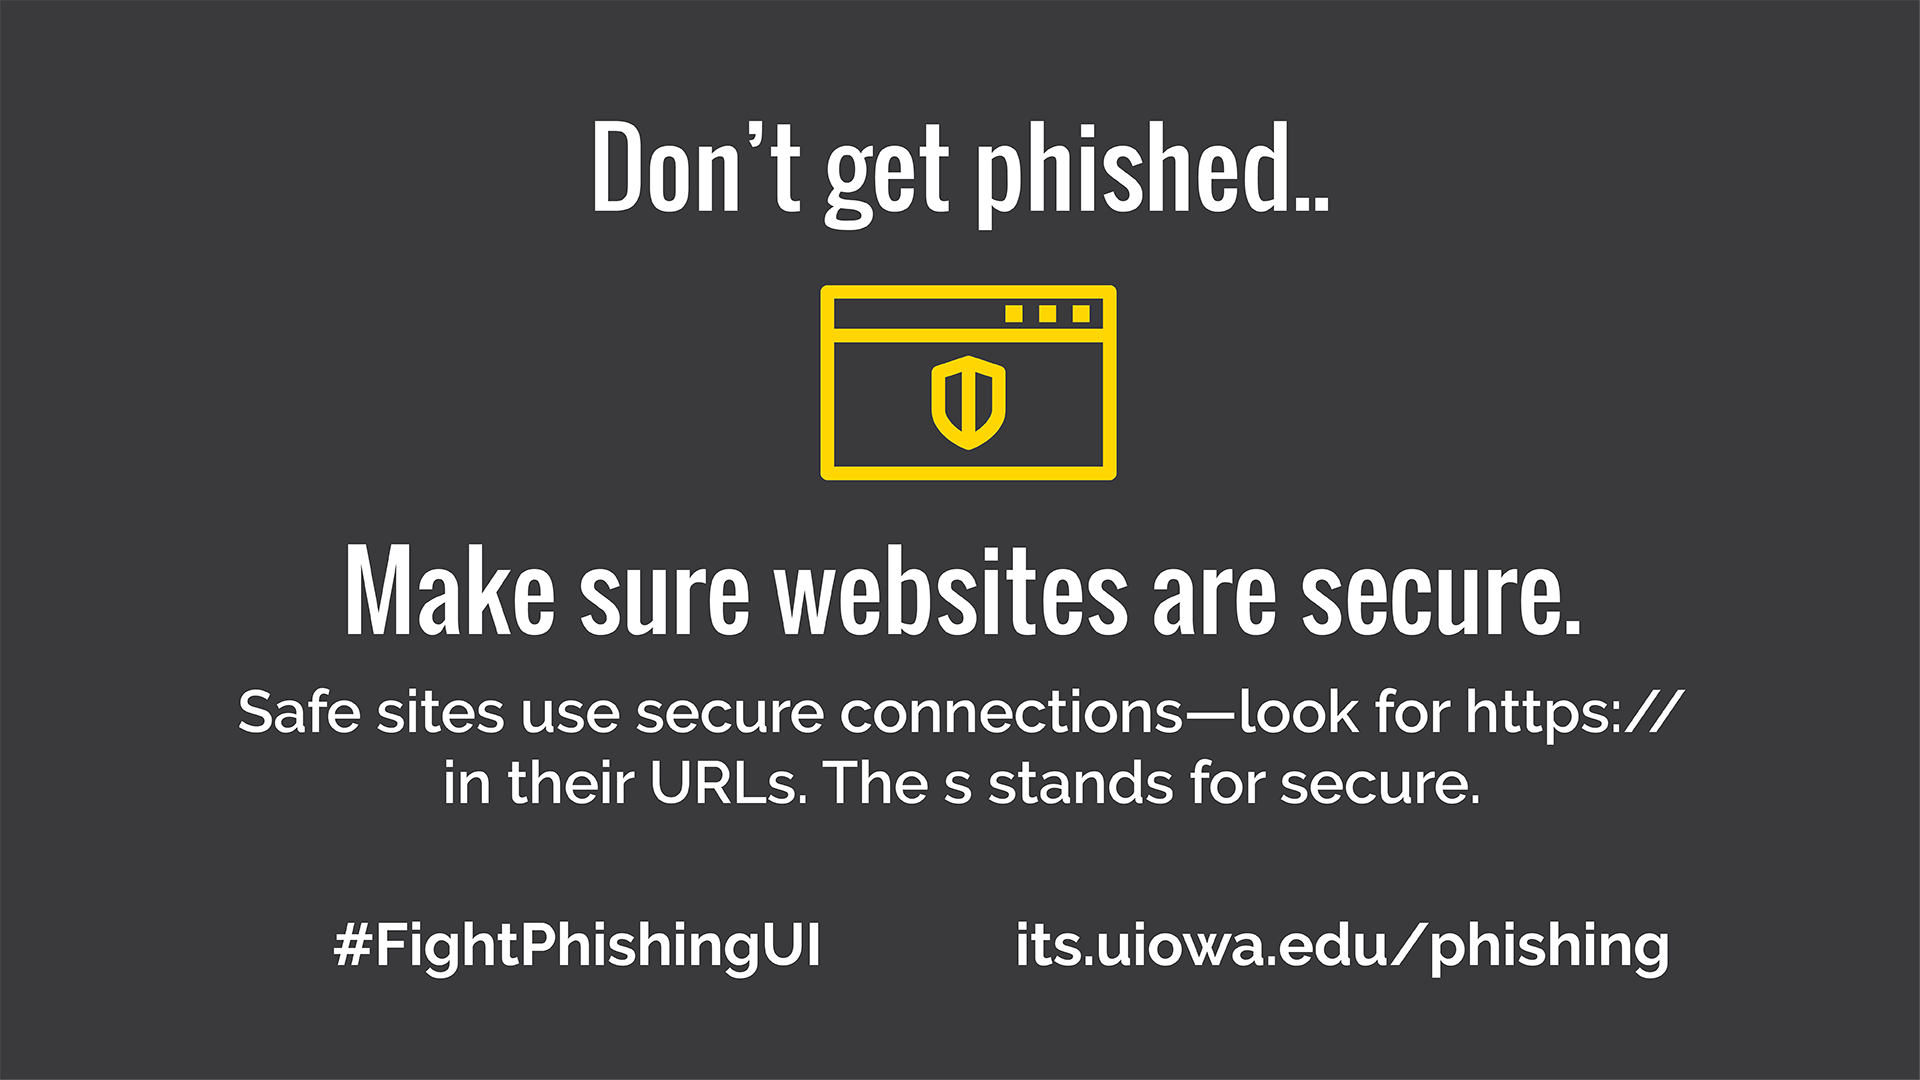 Don't get phished.. Make sure websites are secure. Safe sites use secure connections-- look for https:// in their URLs. The s stands for secure. #FightPhishingUI its.uiowa.edu/phishing